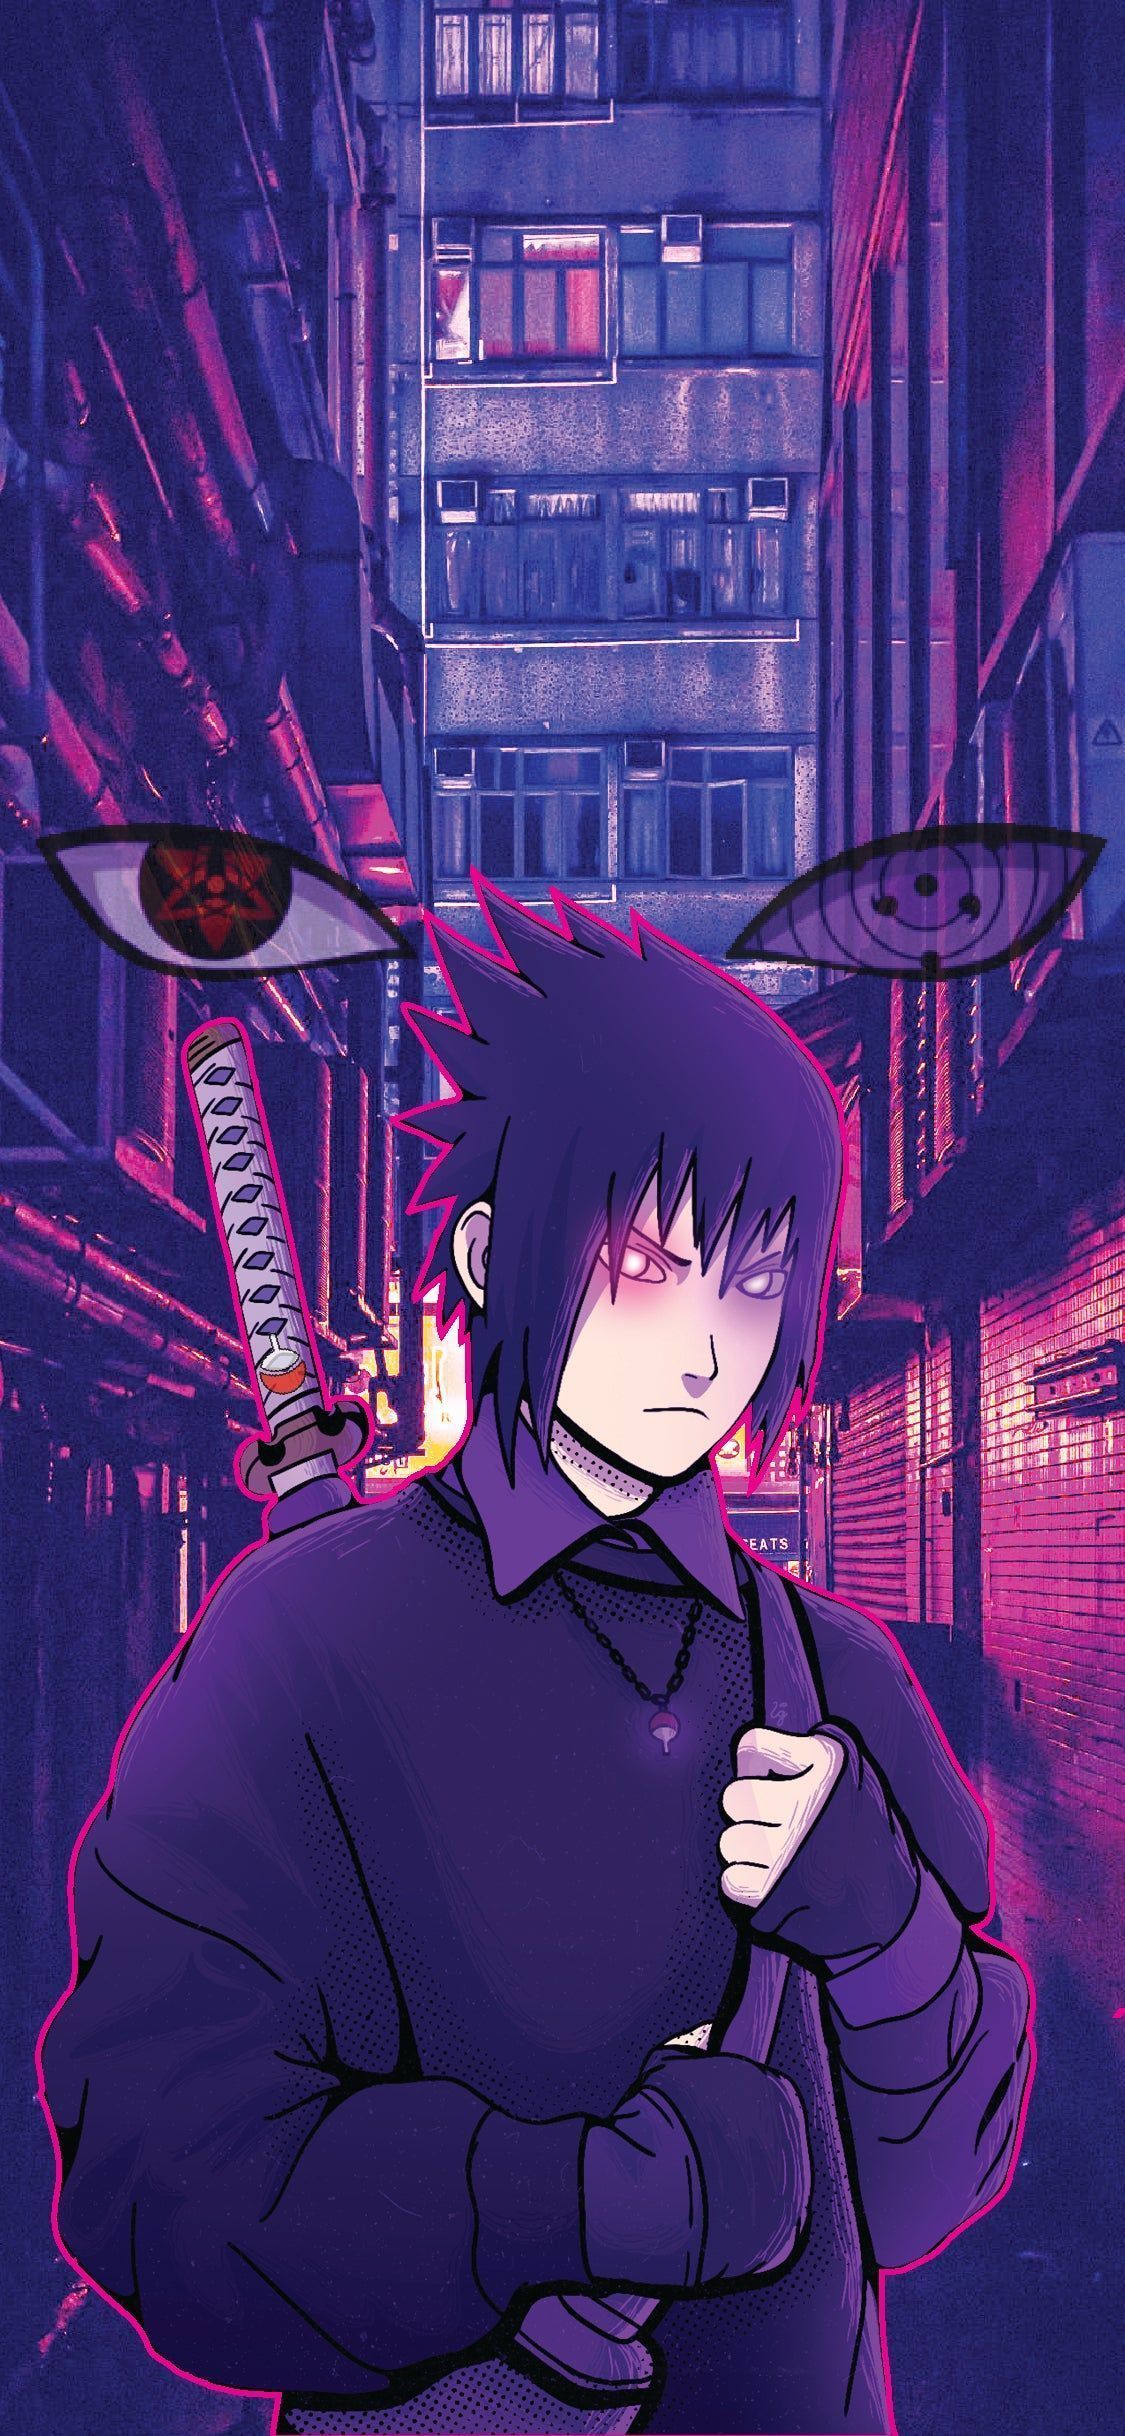 I made this Wallpaper with Sasuke from Naruto Shipudden, in PS and InDesign and I think you guys might like. What do you think